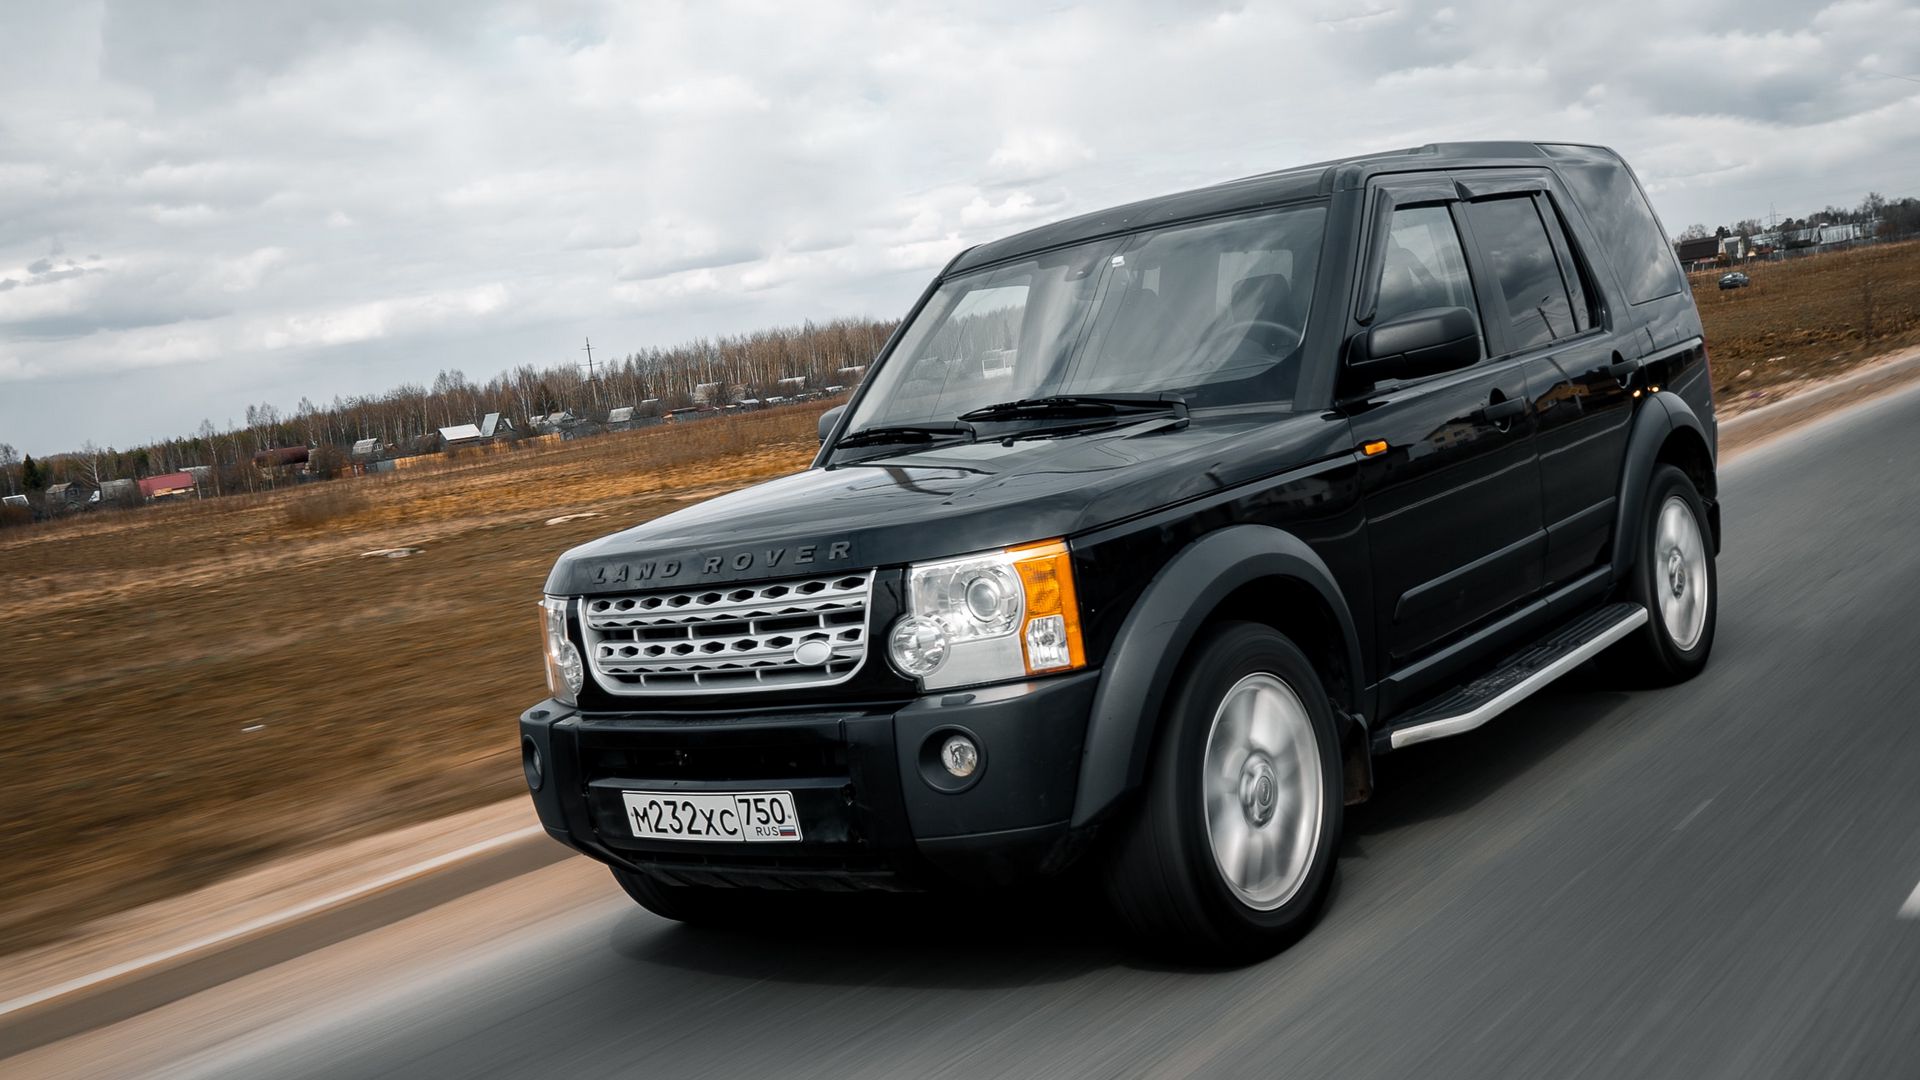 Download wallpaper 1920x1080 land rover discovery 3, land rover, jeep, car,  speed full hd, hdtv, fhd, 1080p hd background